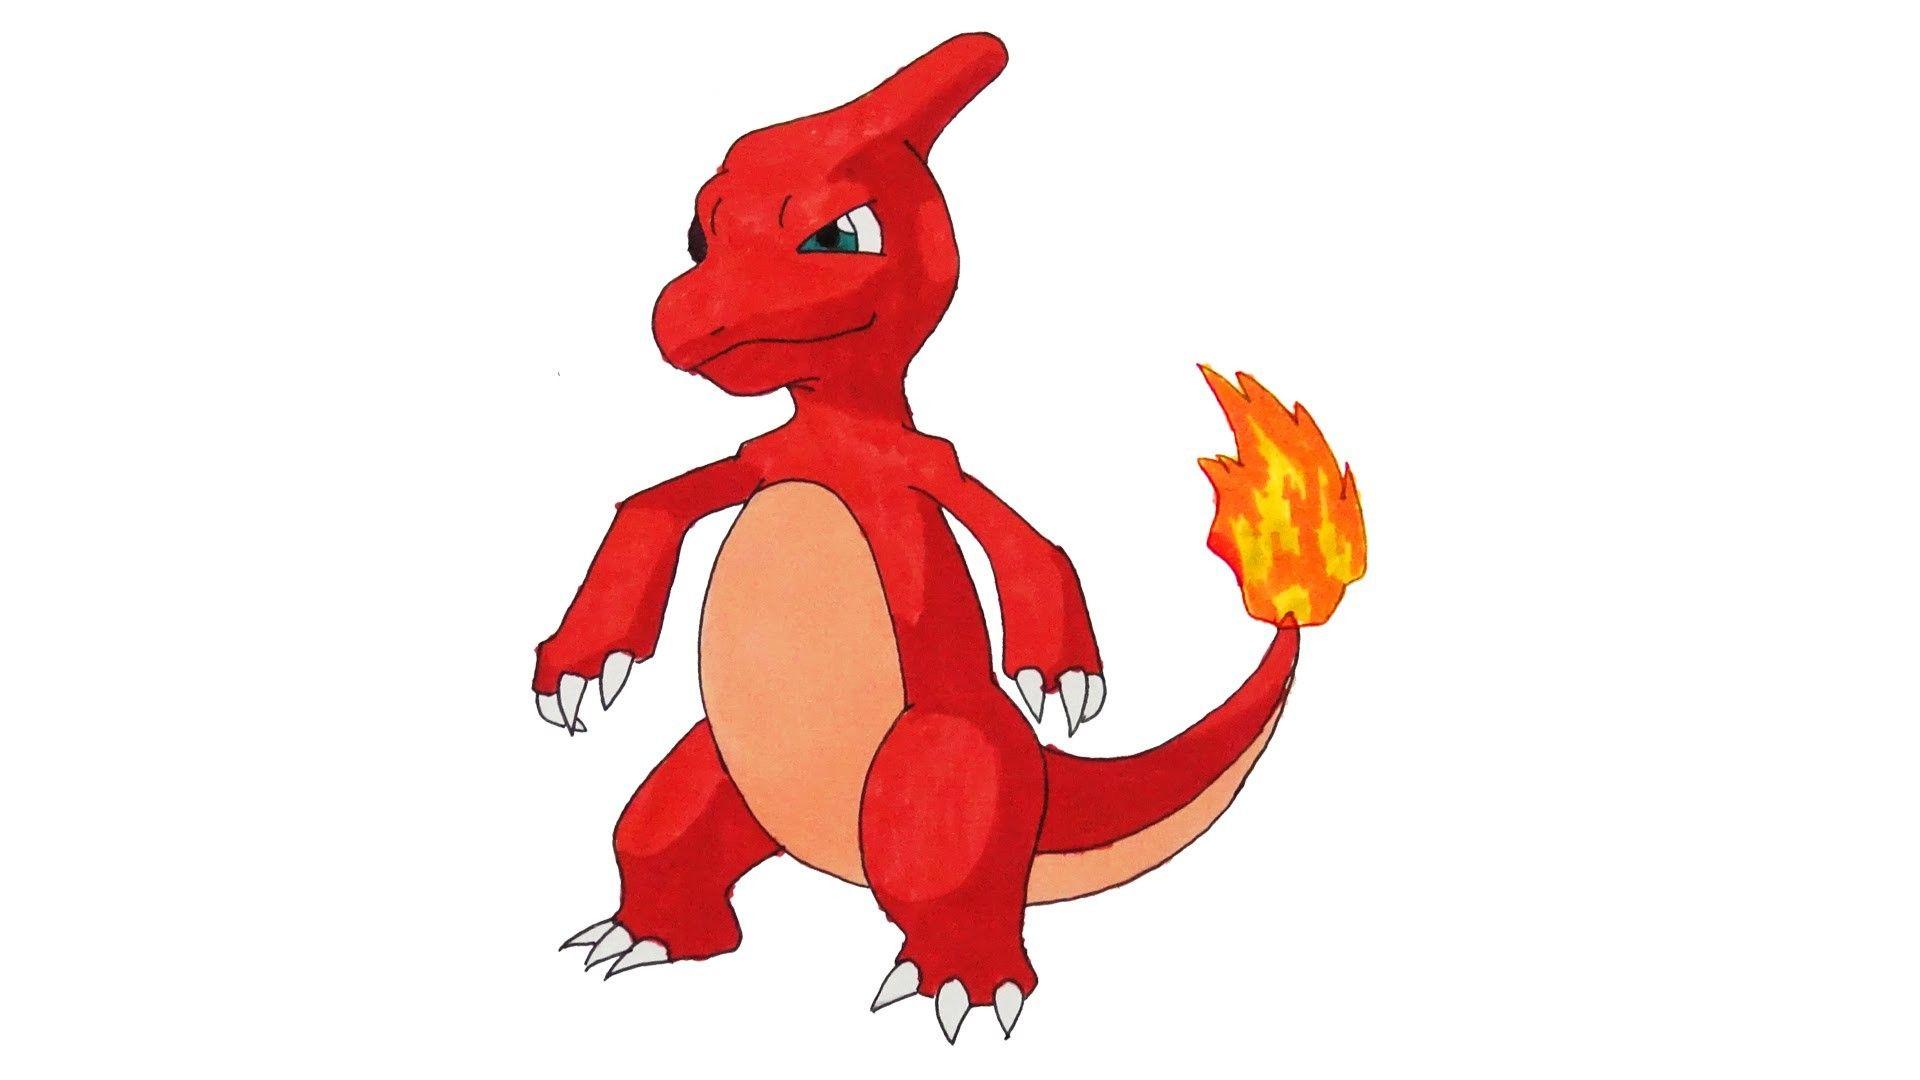 Pokemon Charmeleon, My Crafts and DIY Projects